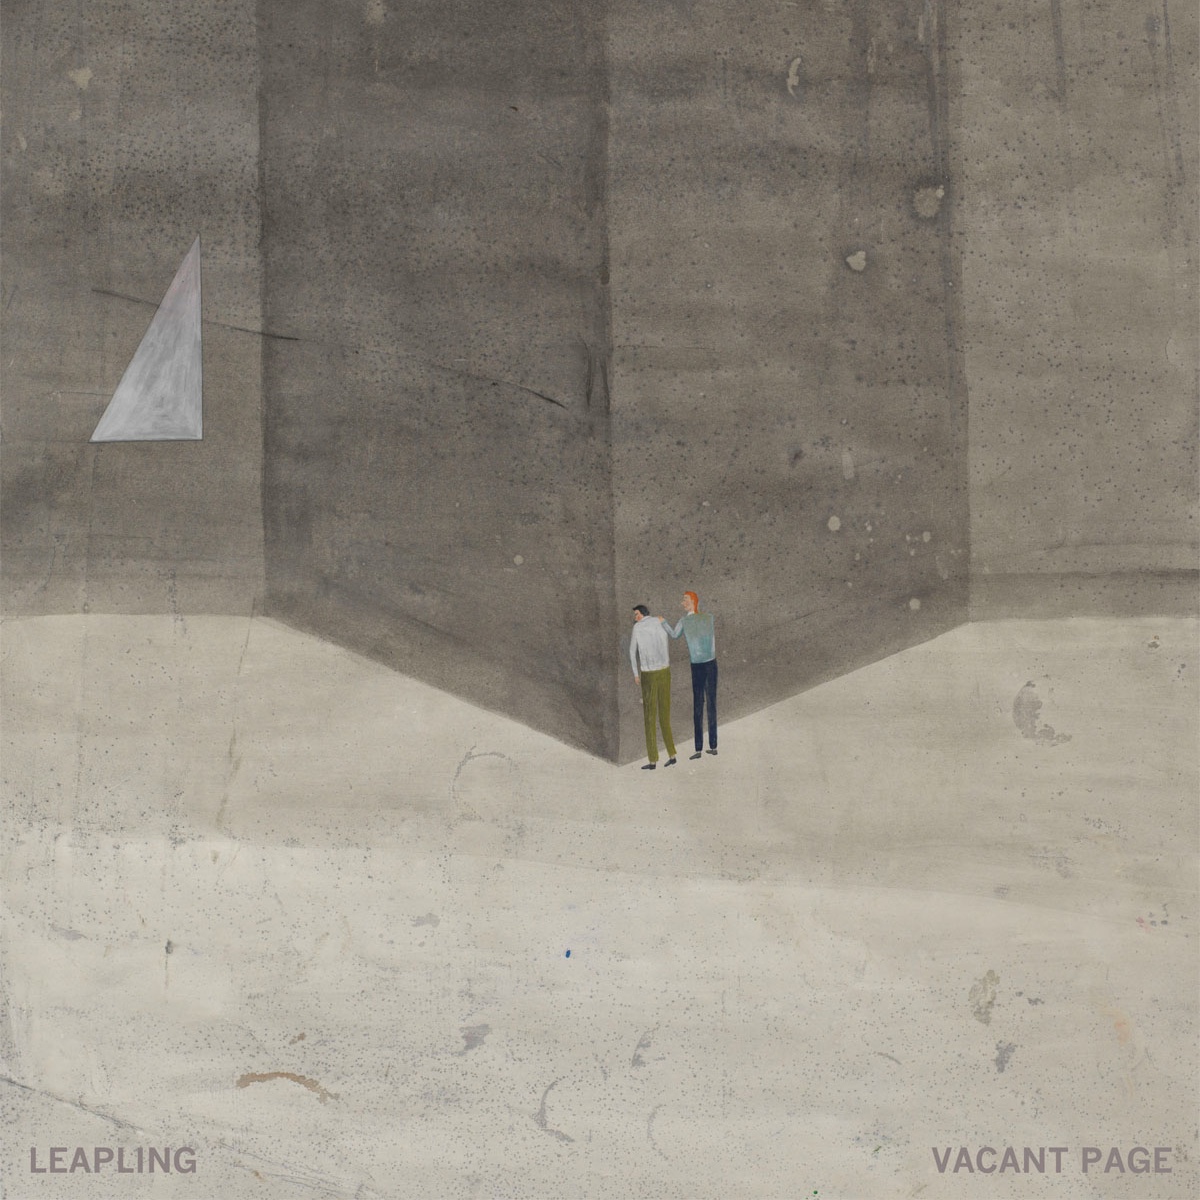 28. LEAPLING | "VACANT PAGE"